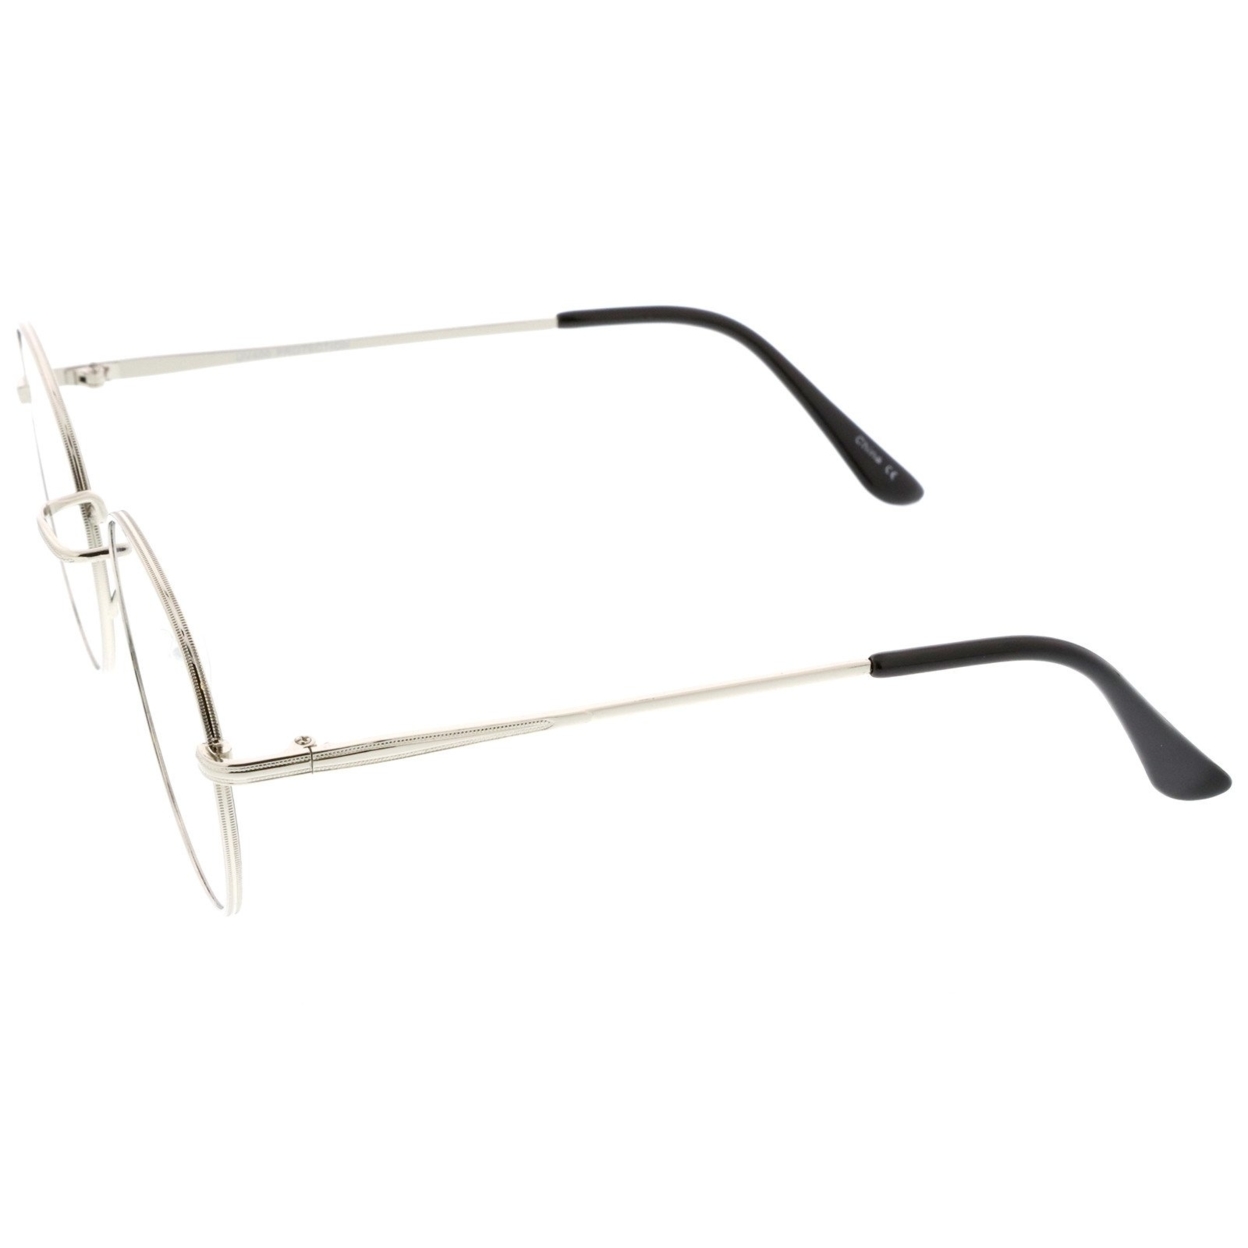 Classic Slim Metal Frame Clear Flat Lens Round Eyeglasses 52mm - Gold /Clear